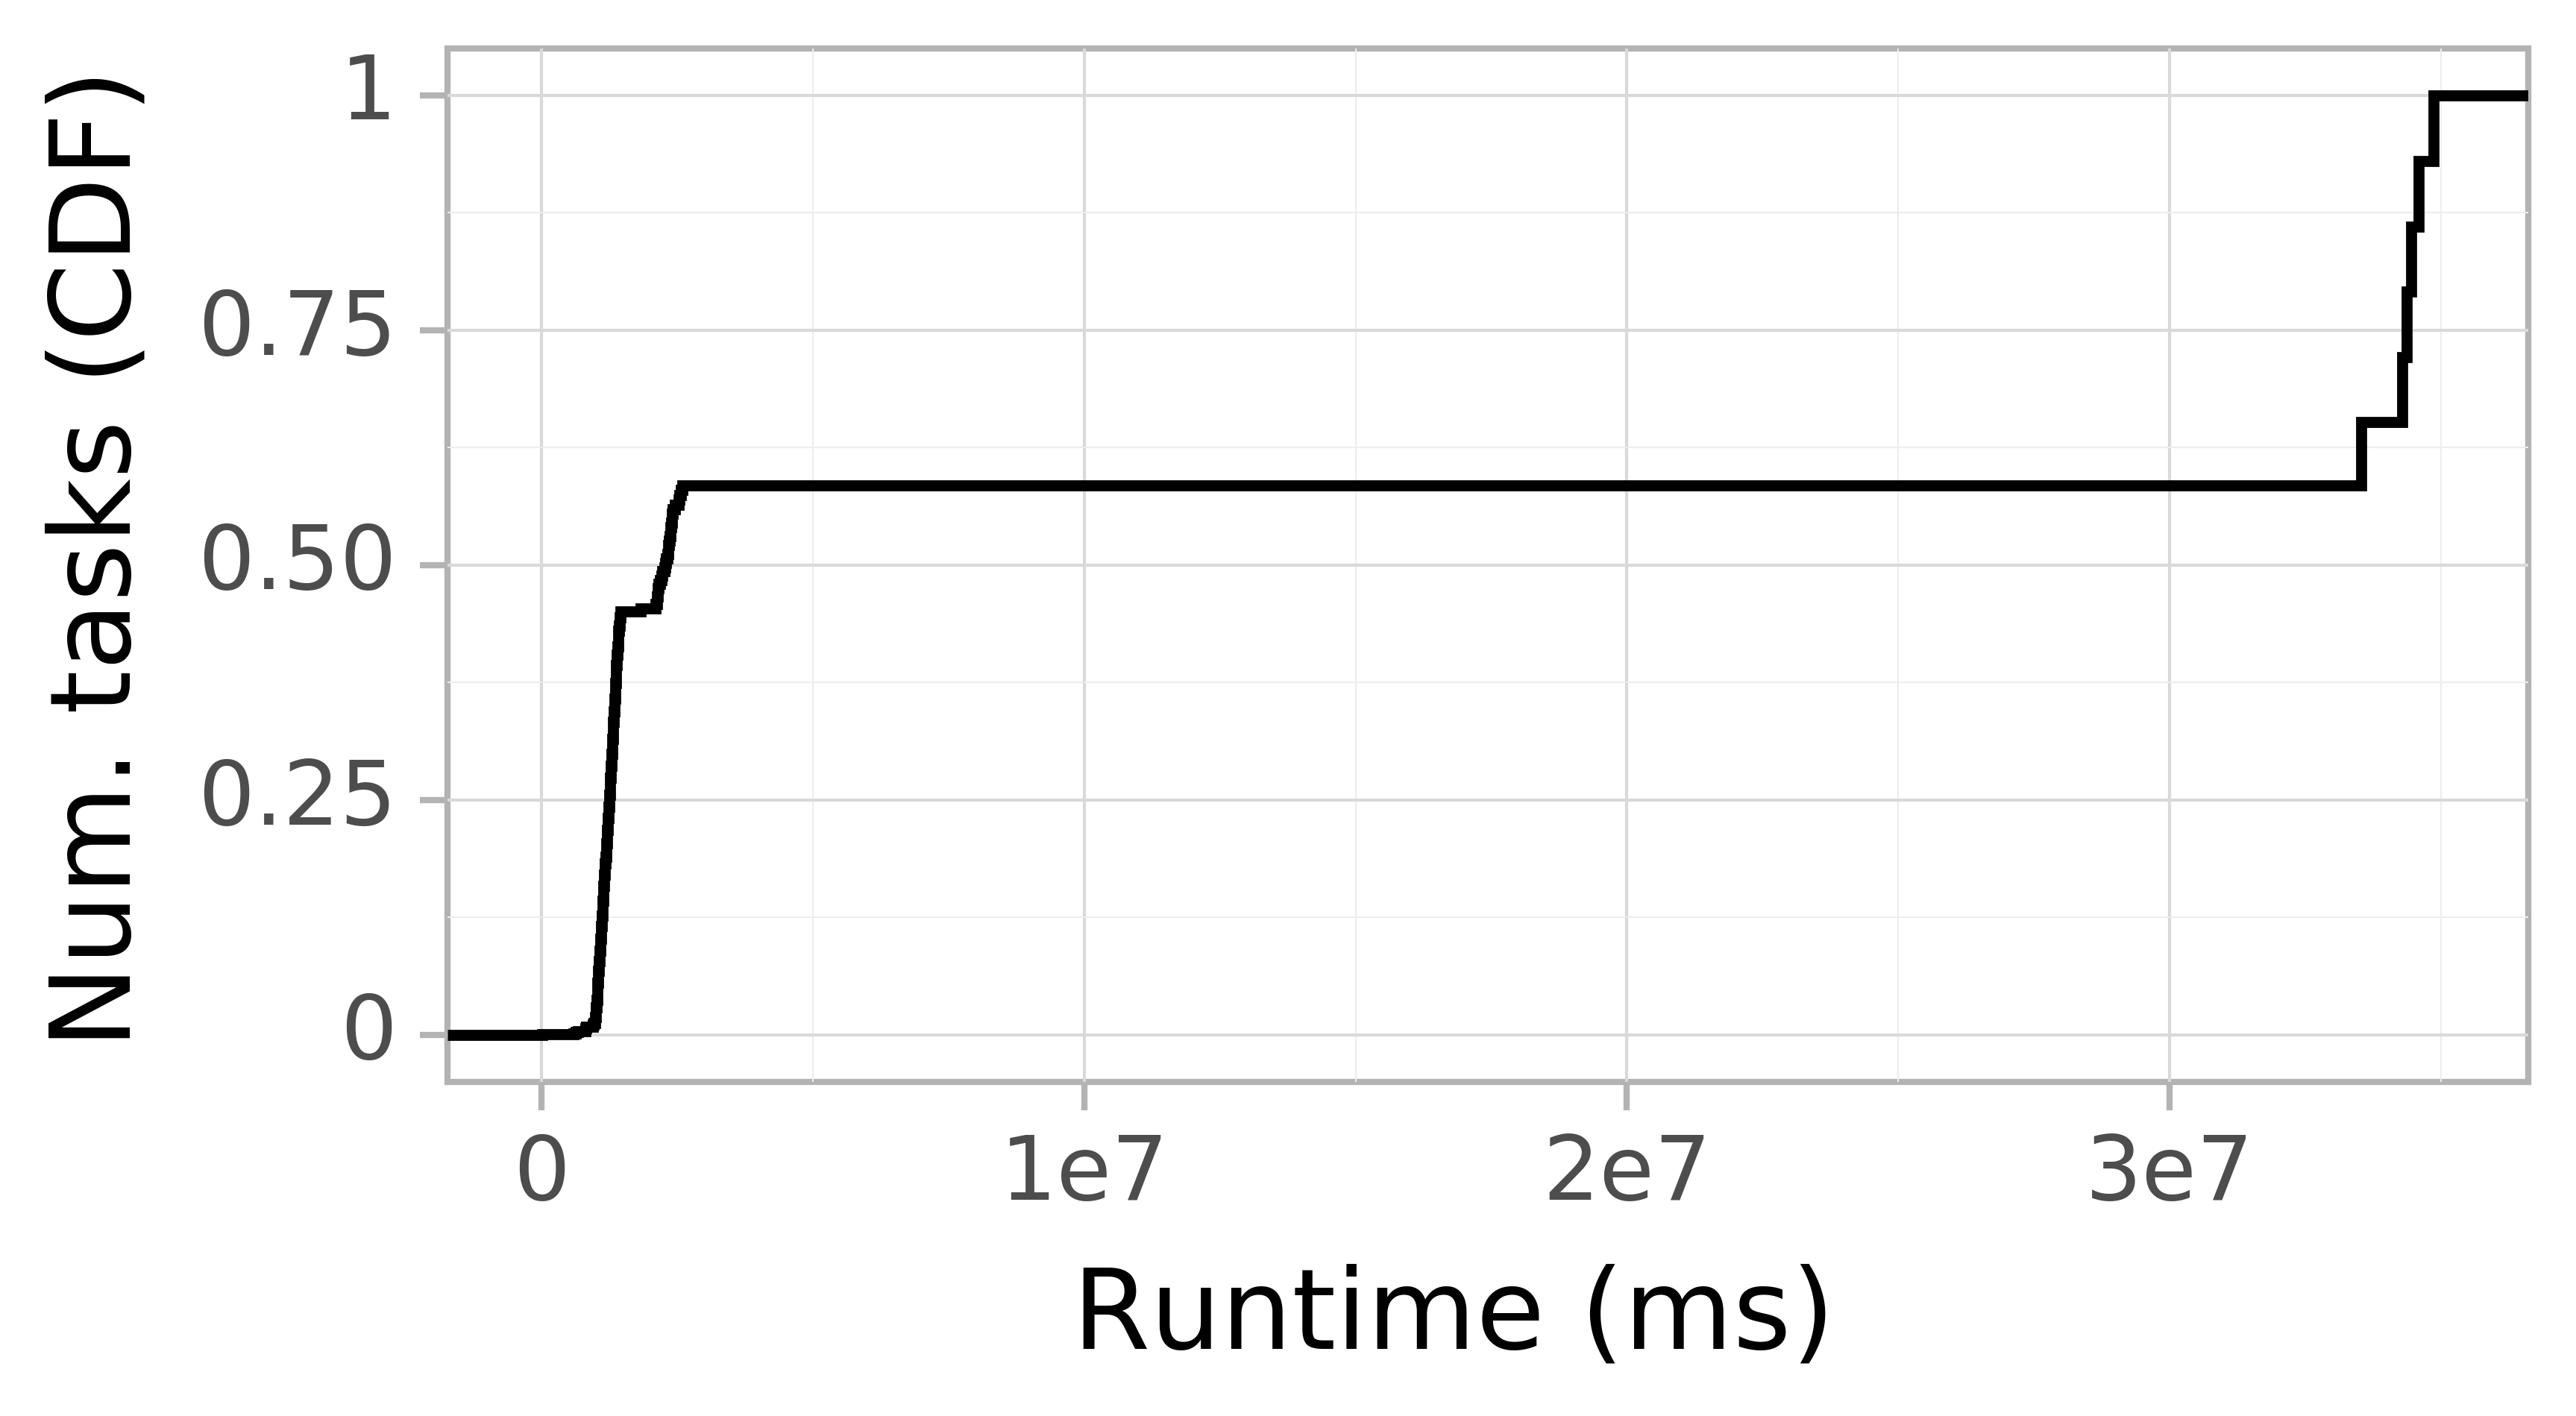 Task runtime CDF graph for the Pegasus_P3 trace.